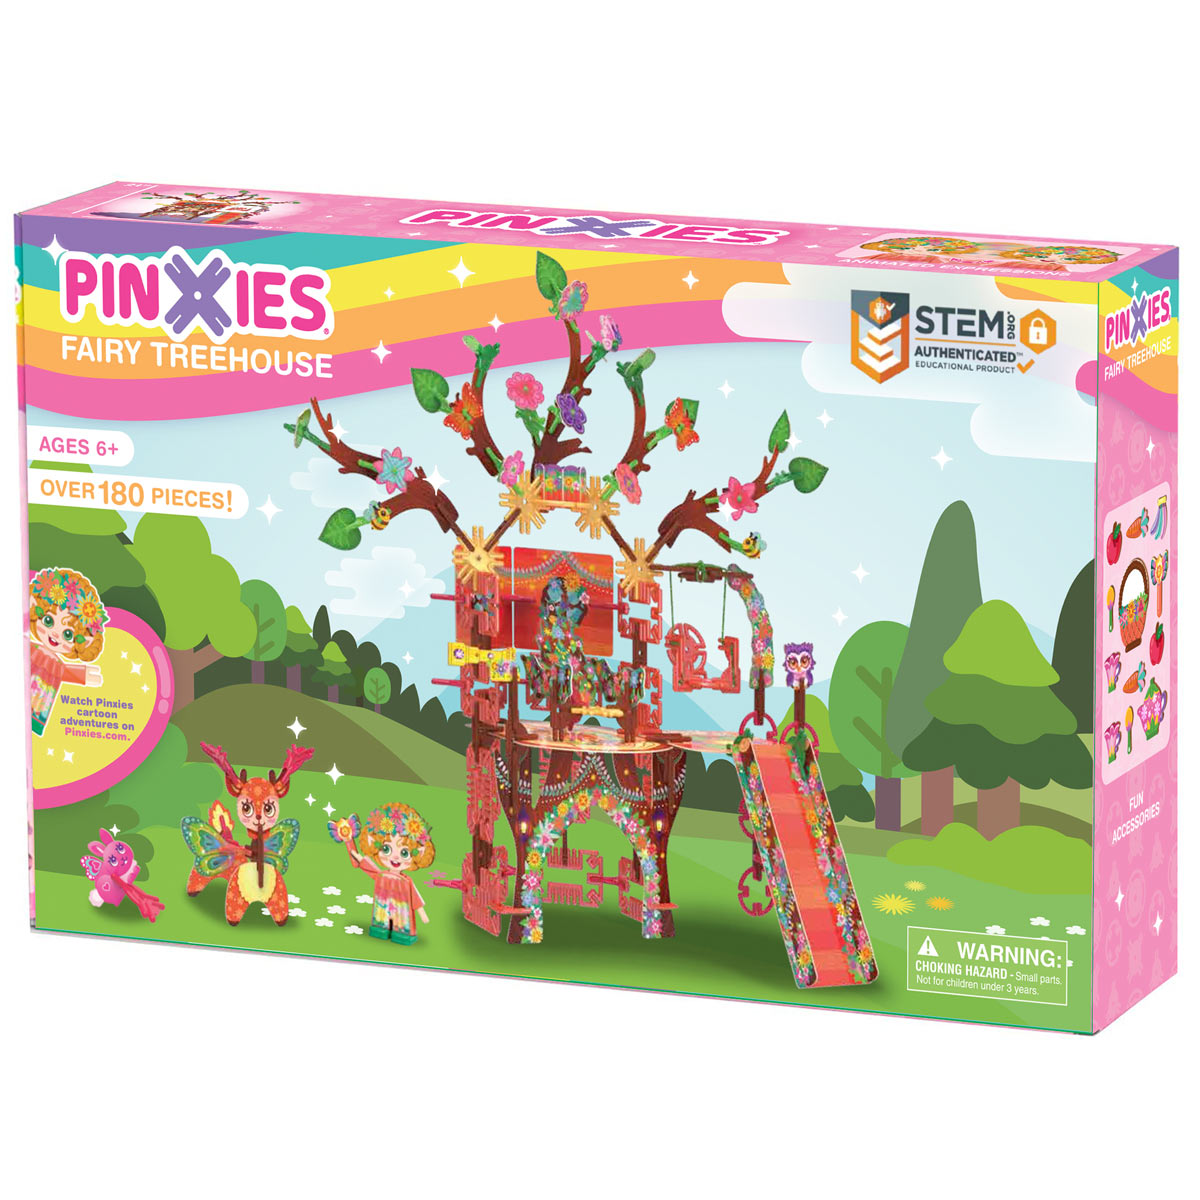 Pinxies Fairy Treehouse STEM authenticated building set for ages 6+